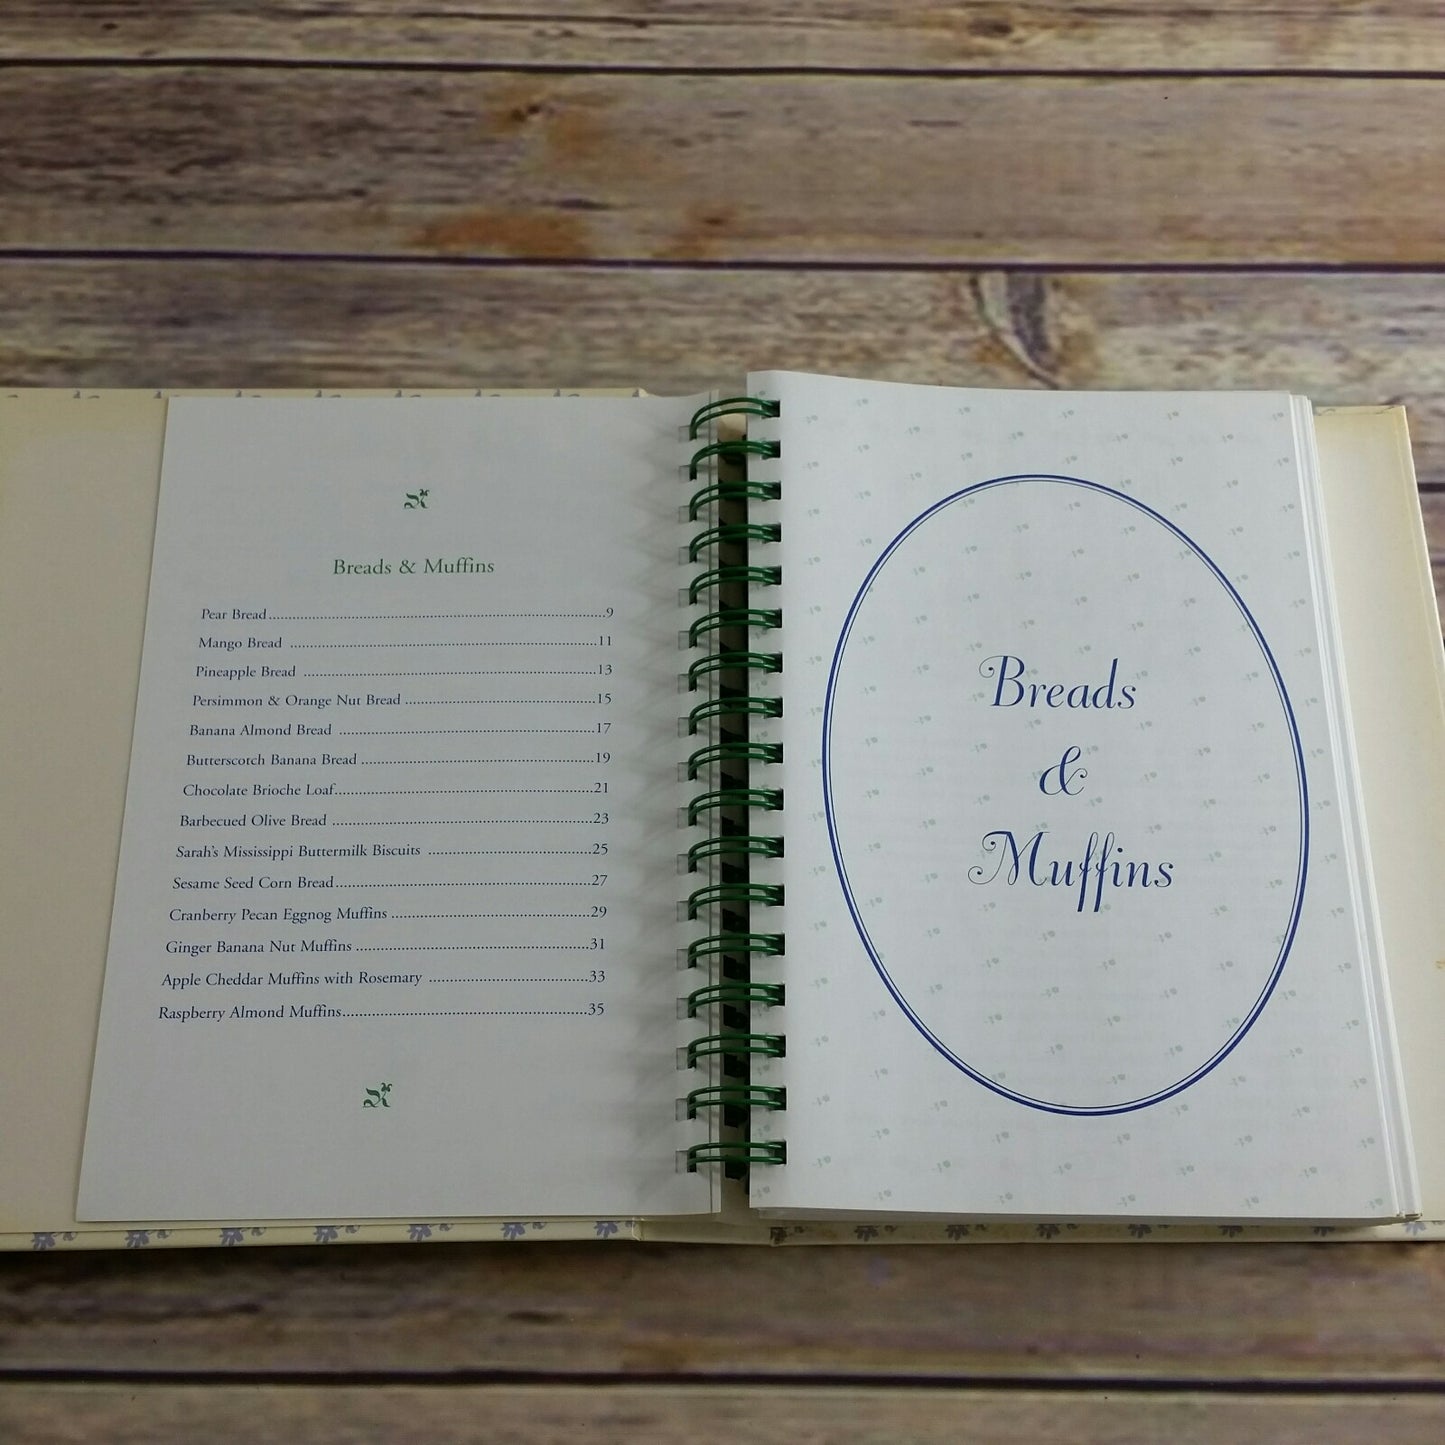 California Cookbook Bed and Breakfast Recipes 2004 Craven Salcito Hardcover Spiral Bound